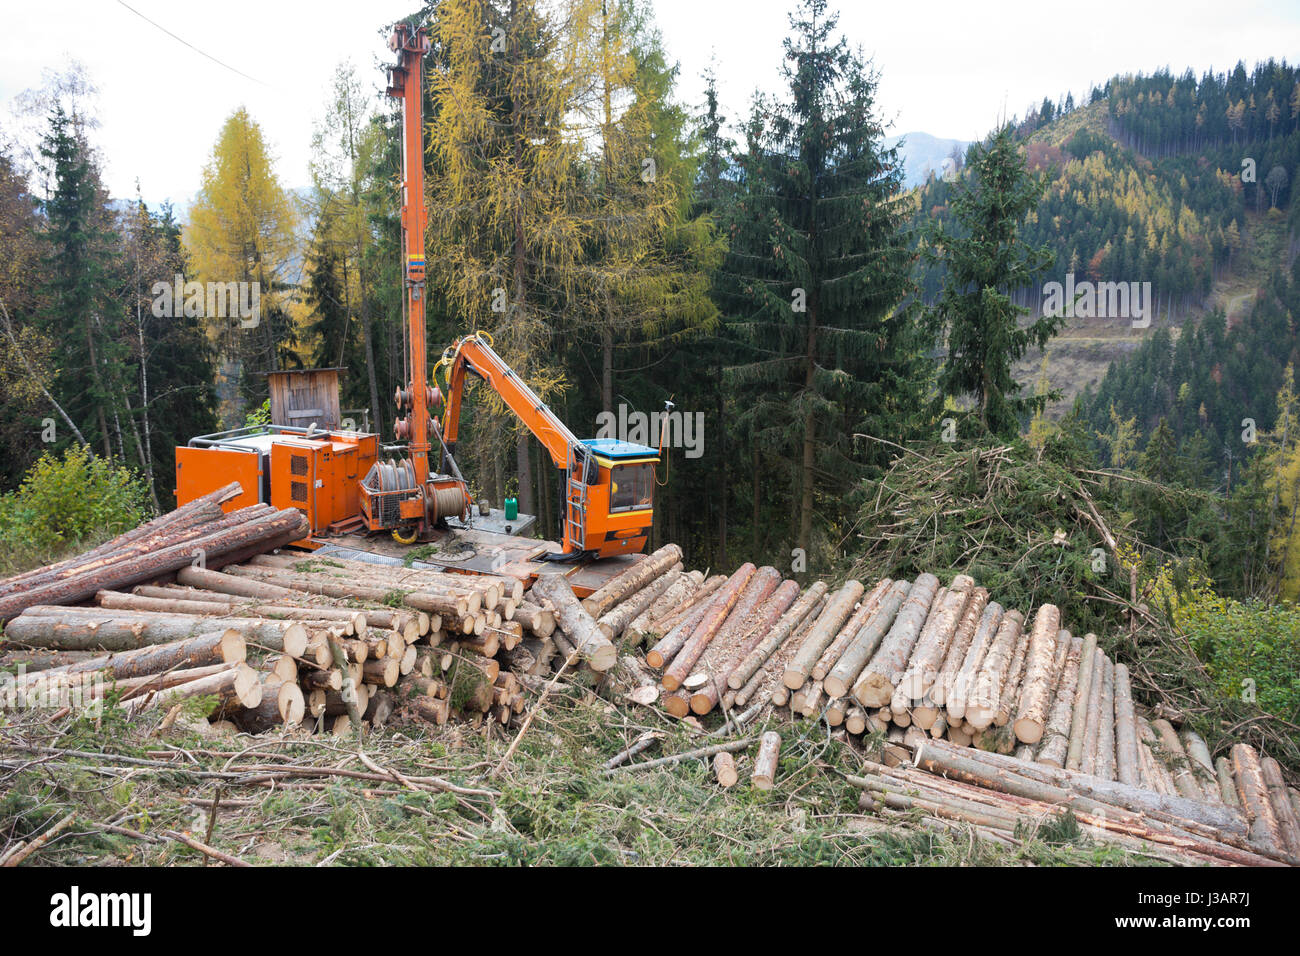 Timber harvesting with a skyline crane and manipulator in an autumnal mixed forest in the Styrian foothills of the limestone alps. Stock Photo